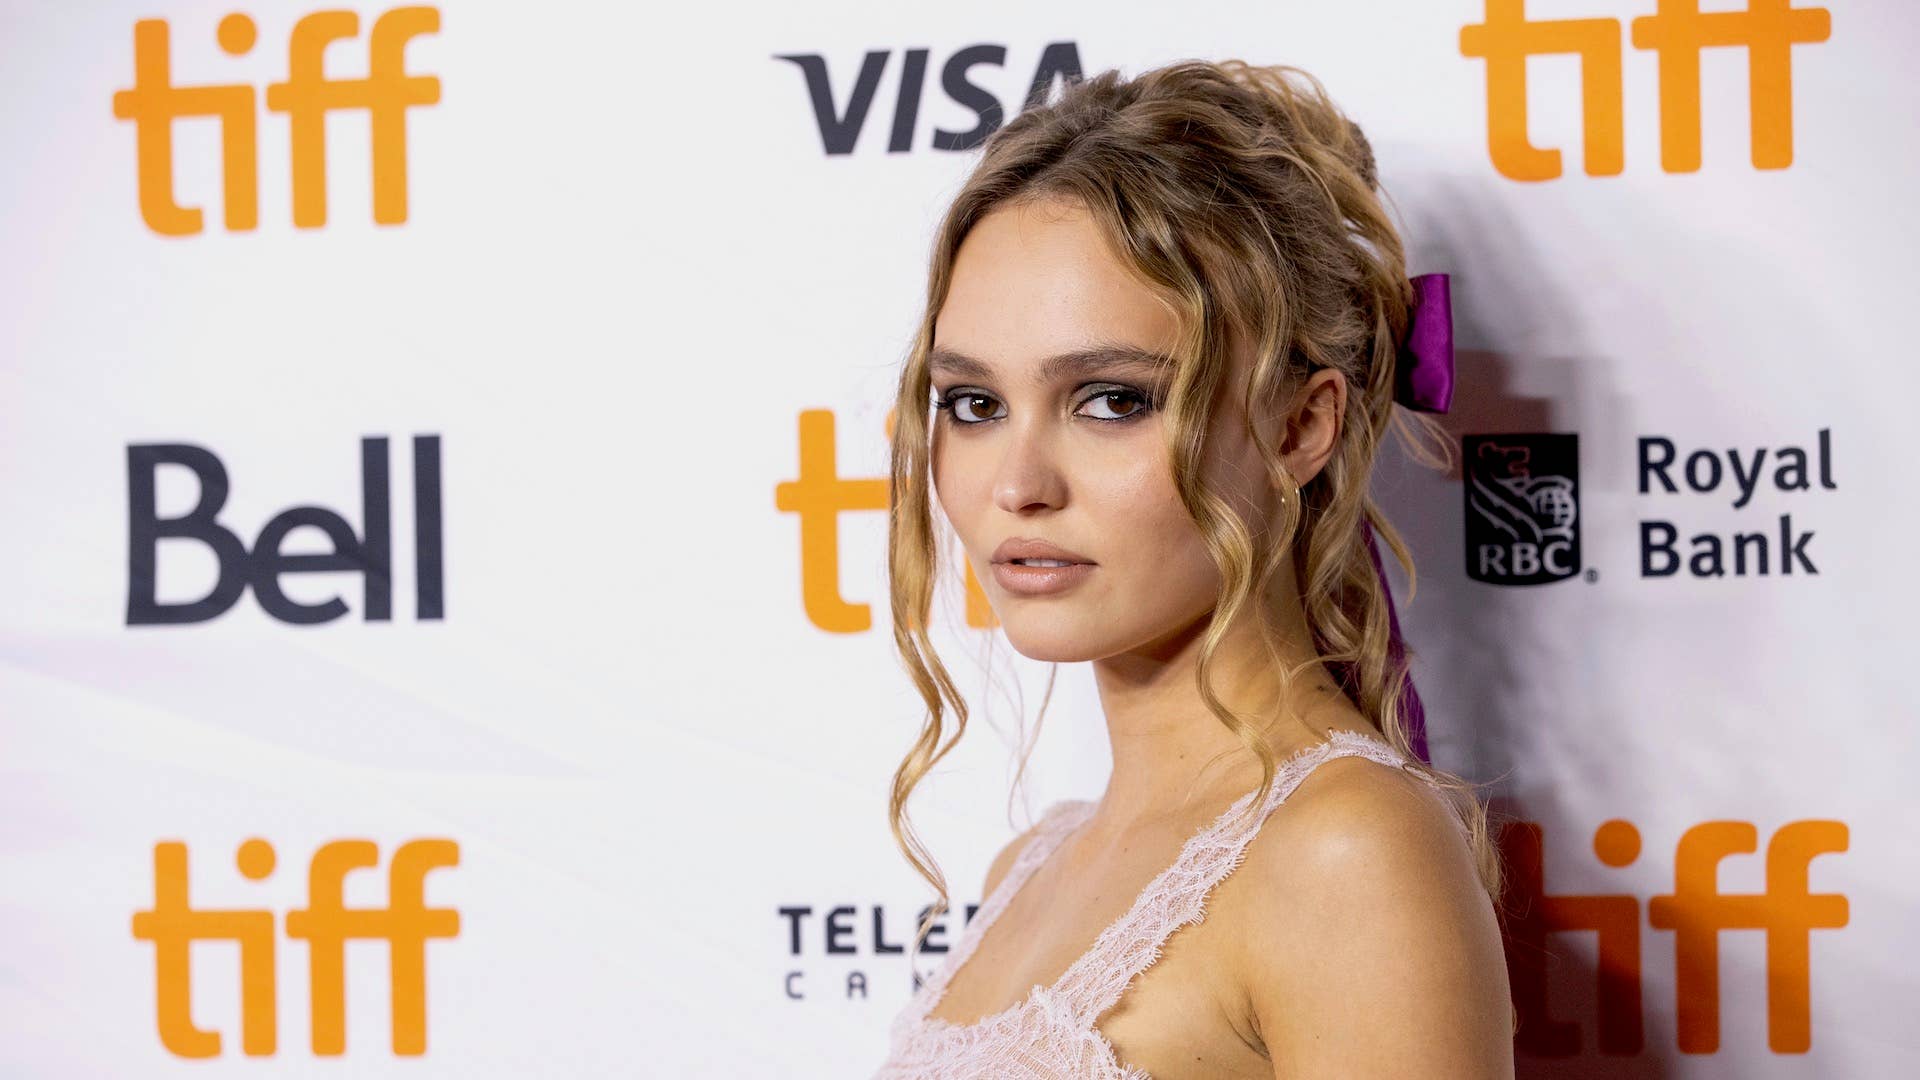 Lily Rose Depp attends the "Wolf" Premiere